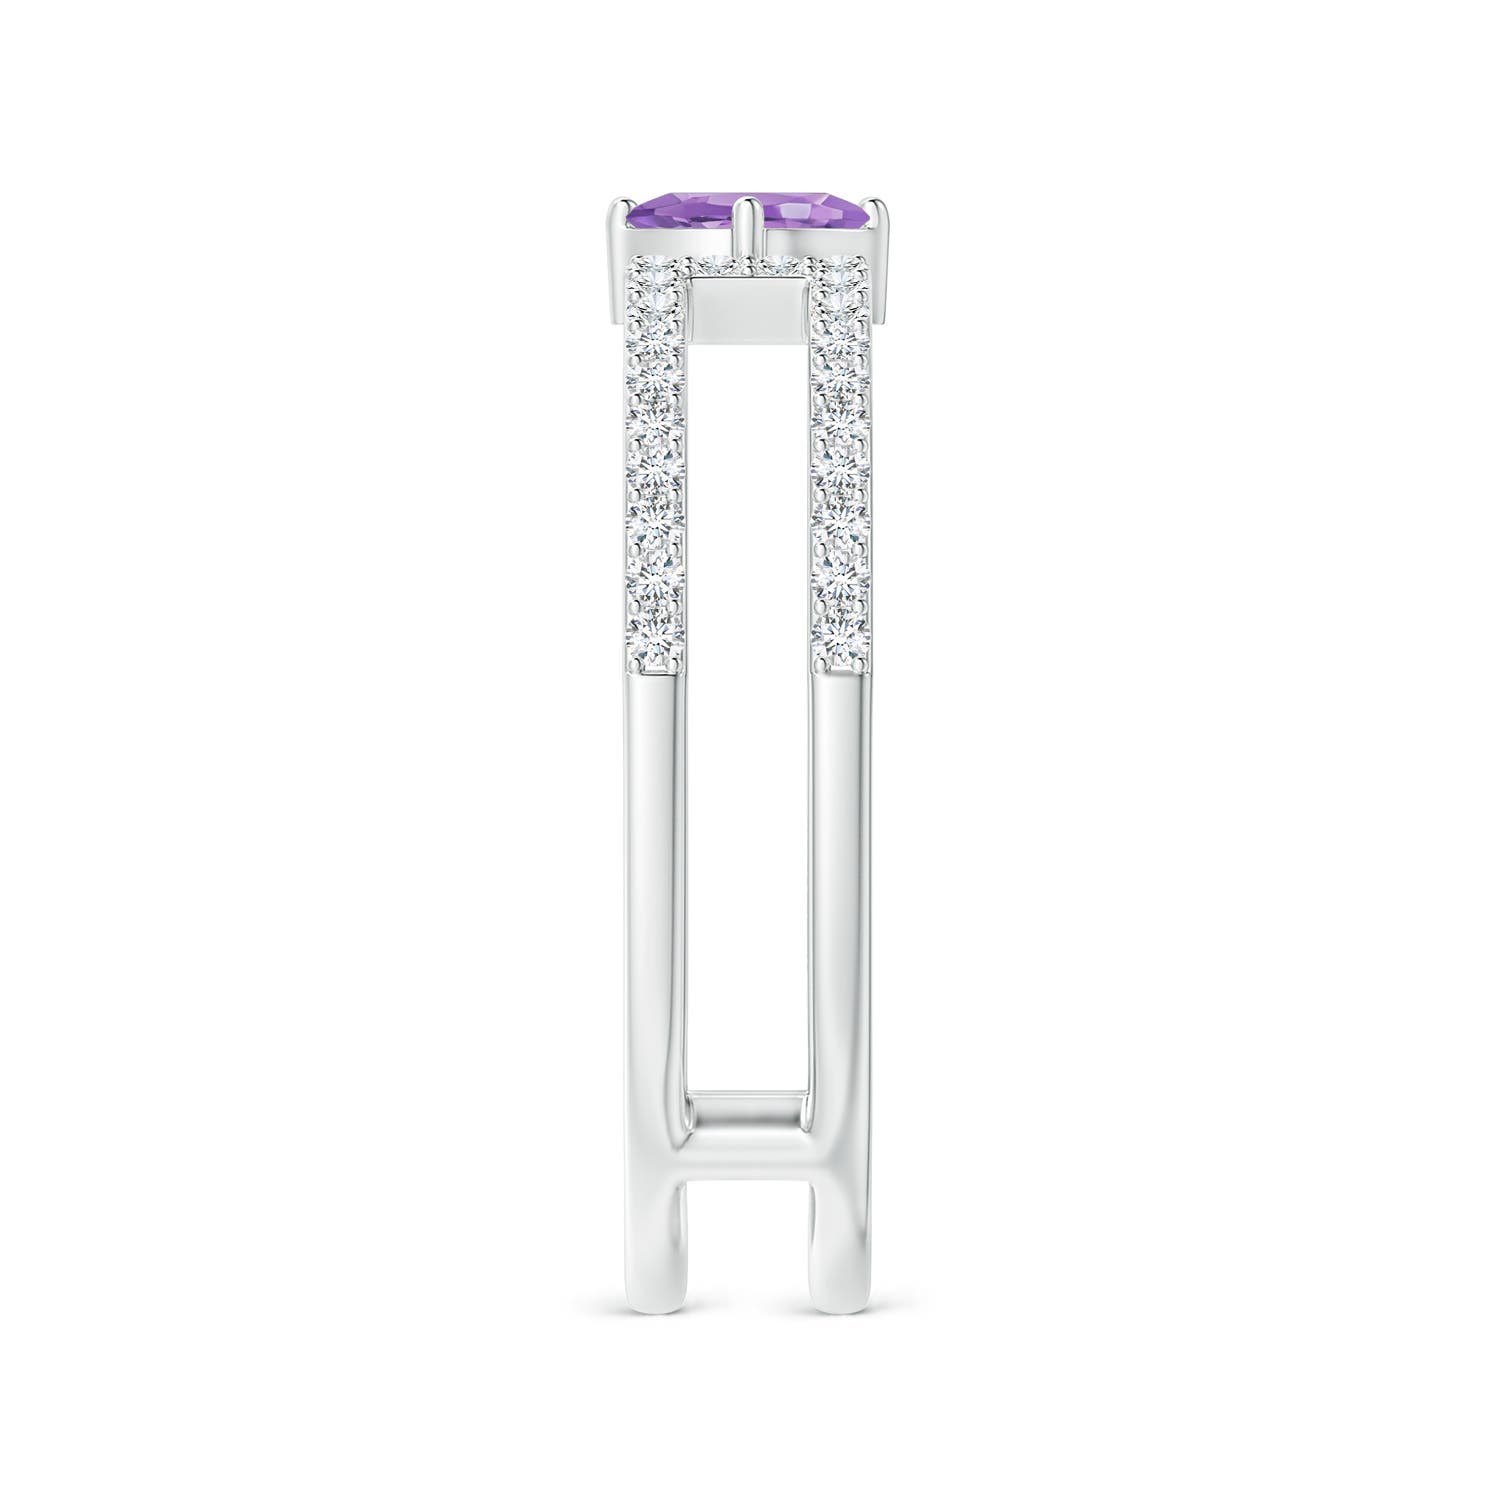 A - Amethyst / 0.44 CT / 14 KT White Gold